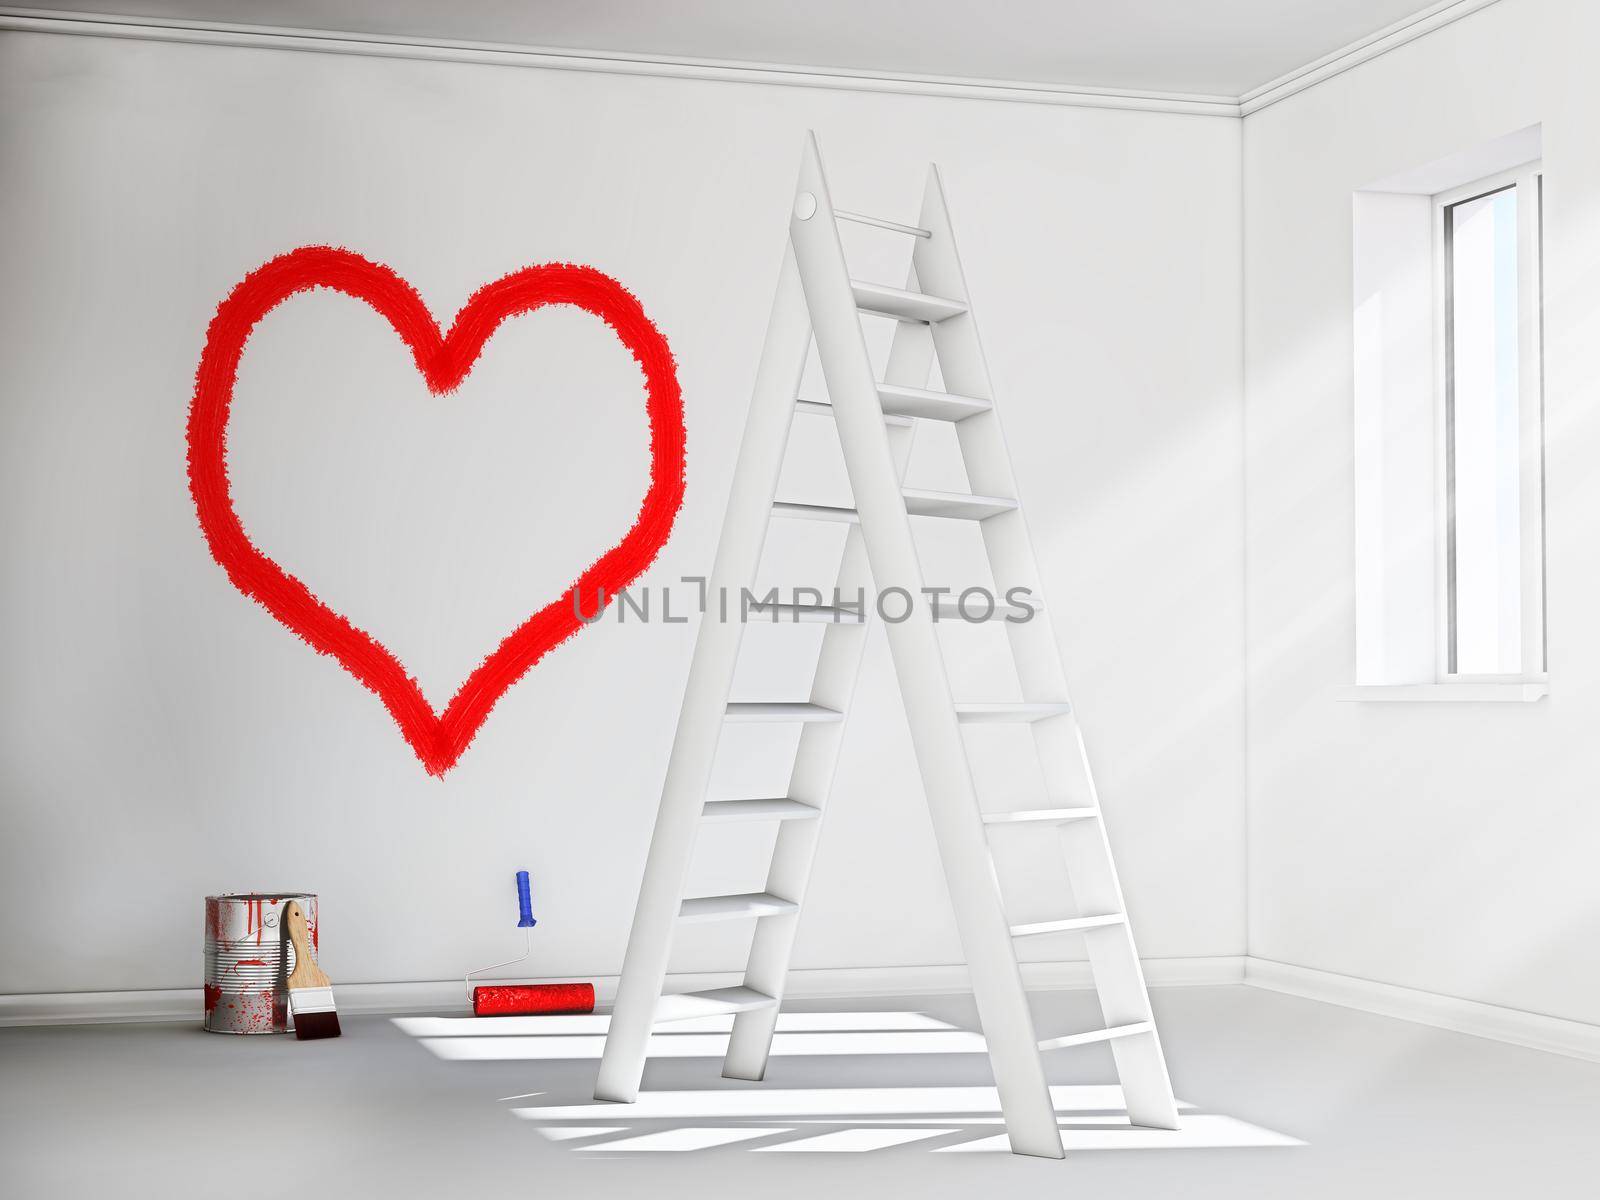 red heart painted on the wall symbolizes love